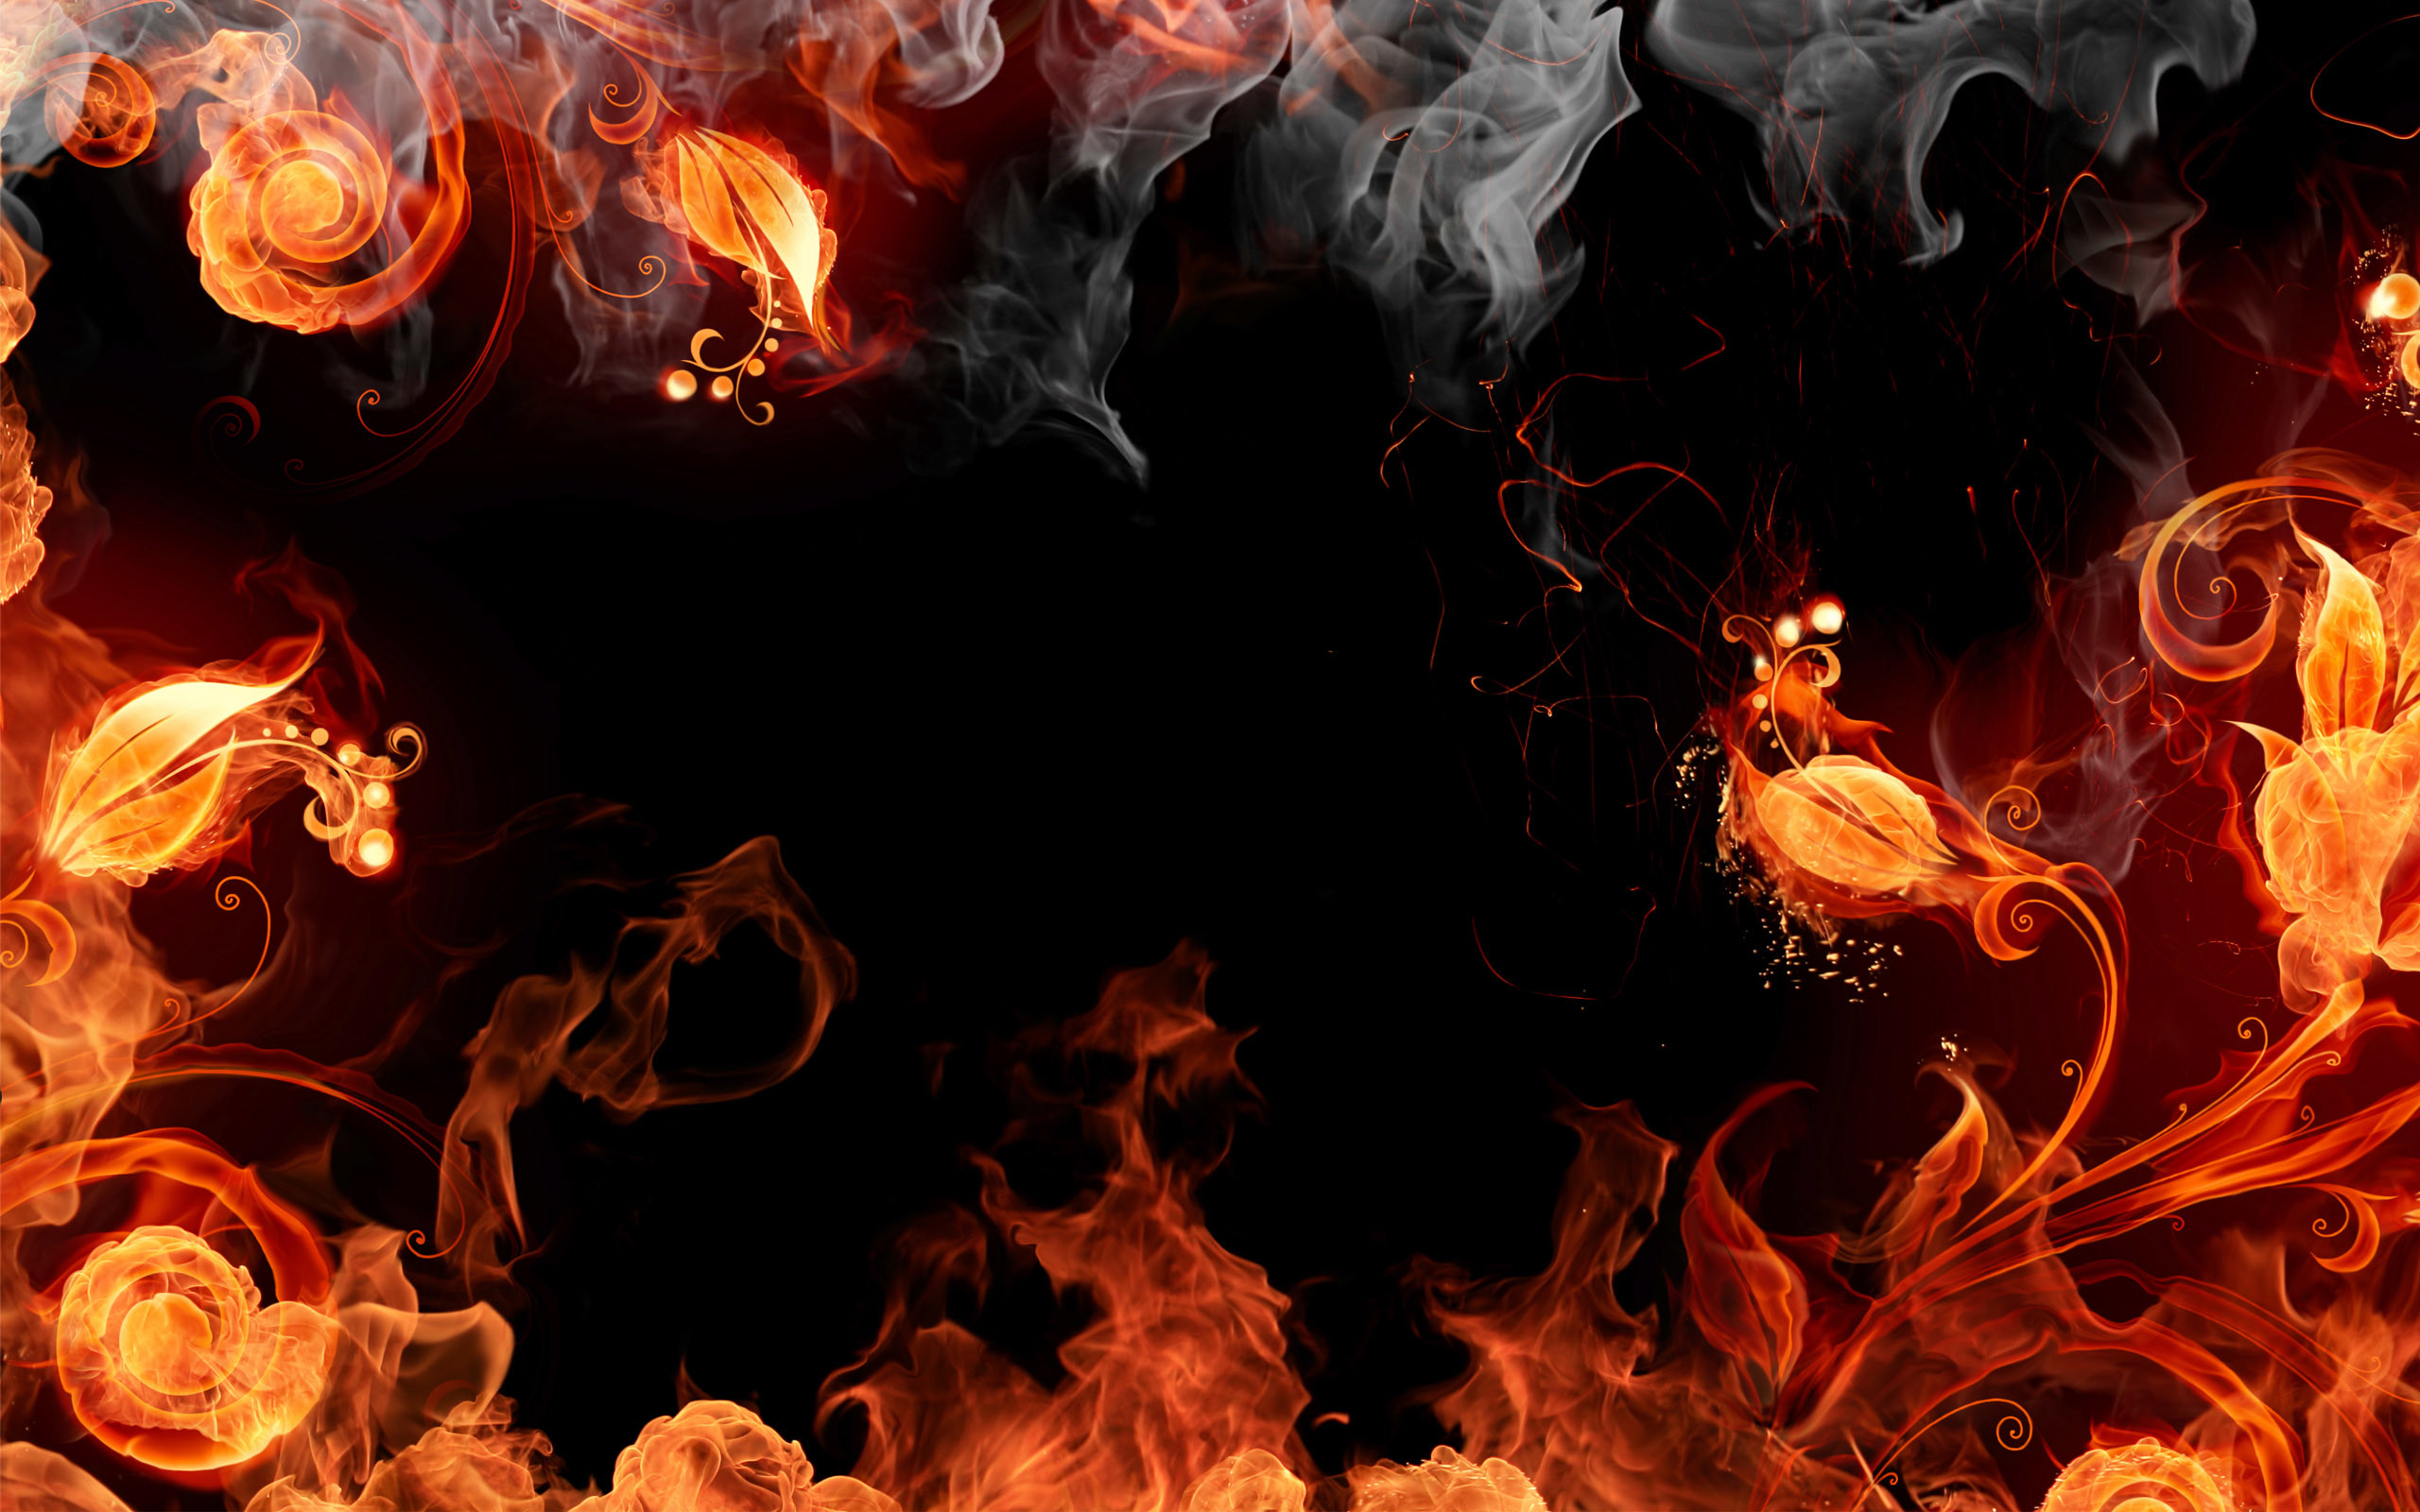 Fire Live Wallpaper for Computer (52+